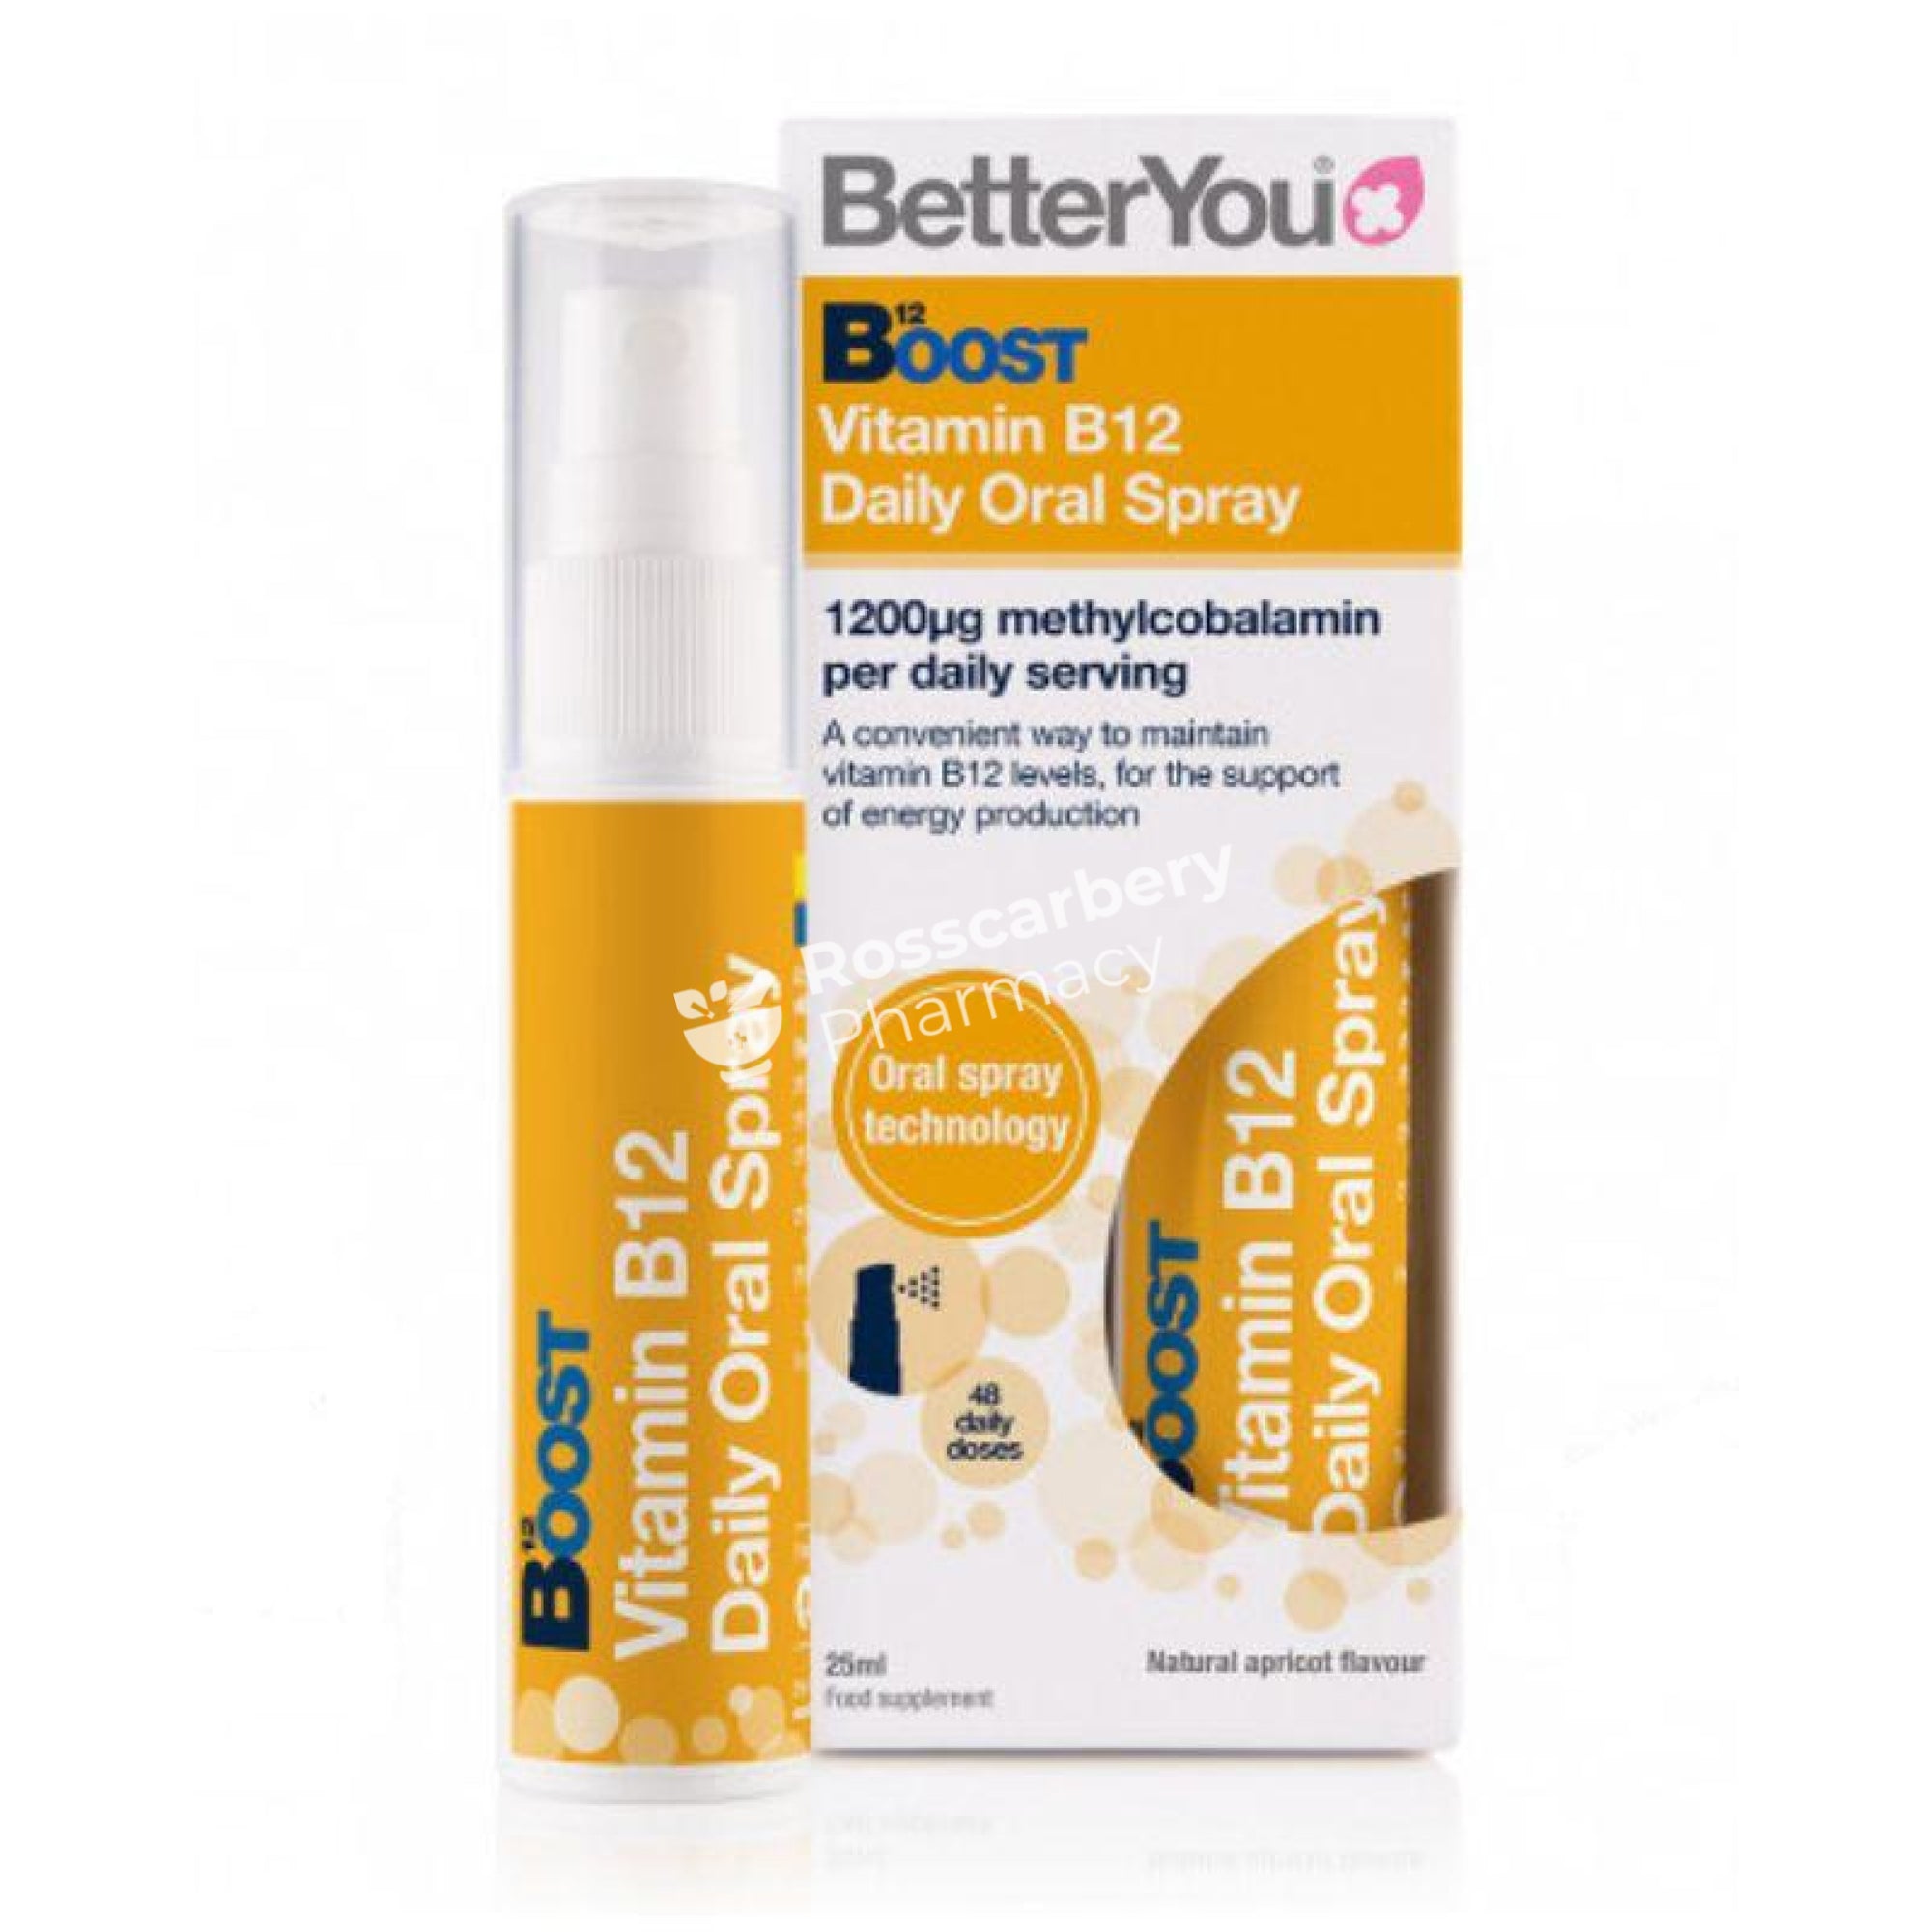 Betteryou Boost Vitamin B12 Daily Oral Spray Energy & Wellbeing